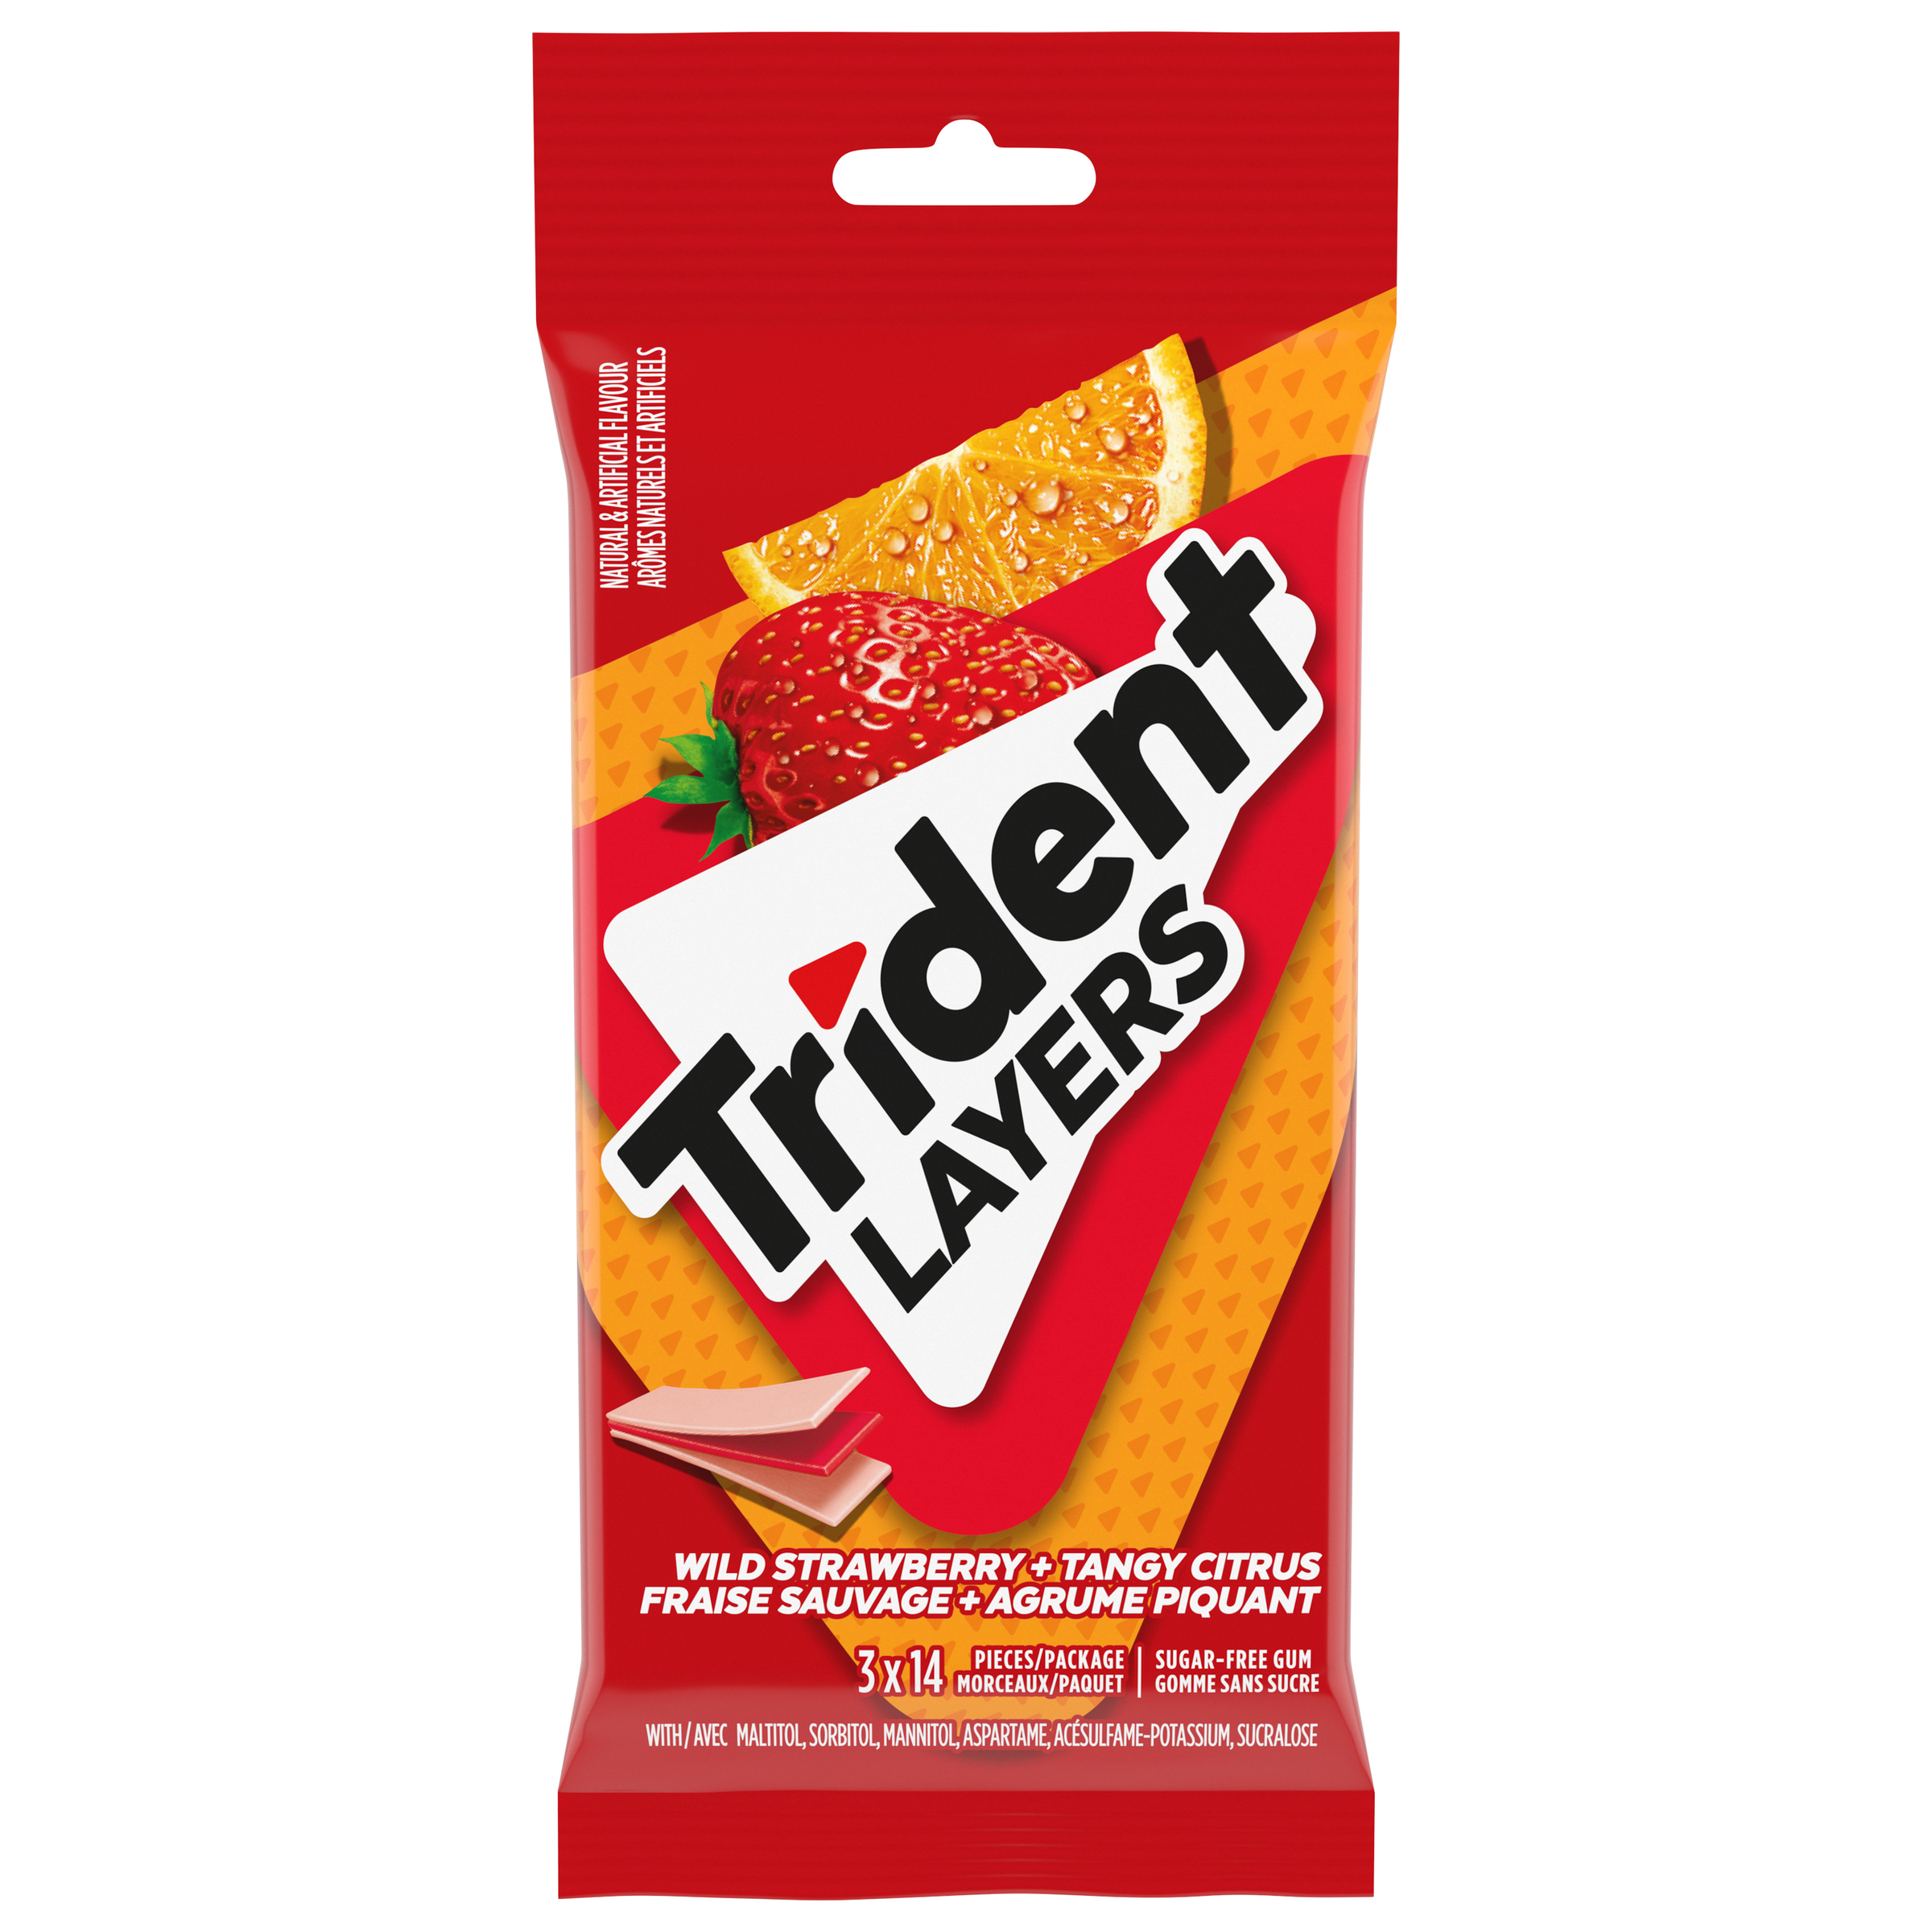 Trident Layers Wild Strawberry/Tangy Citrus Gum 42 Count